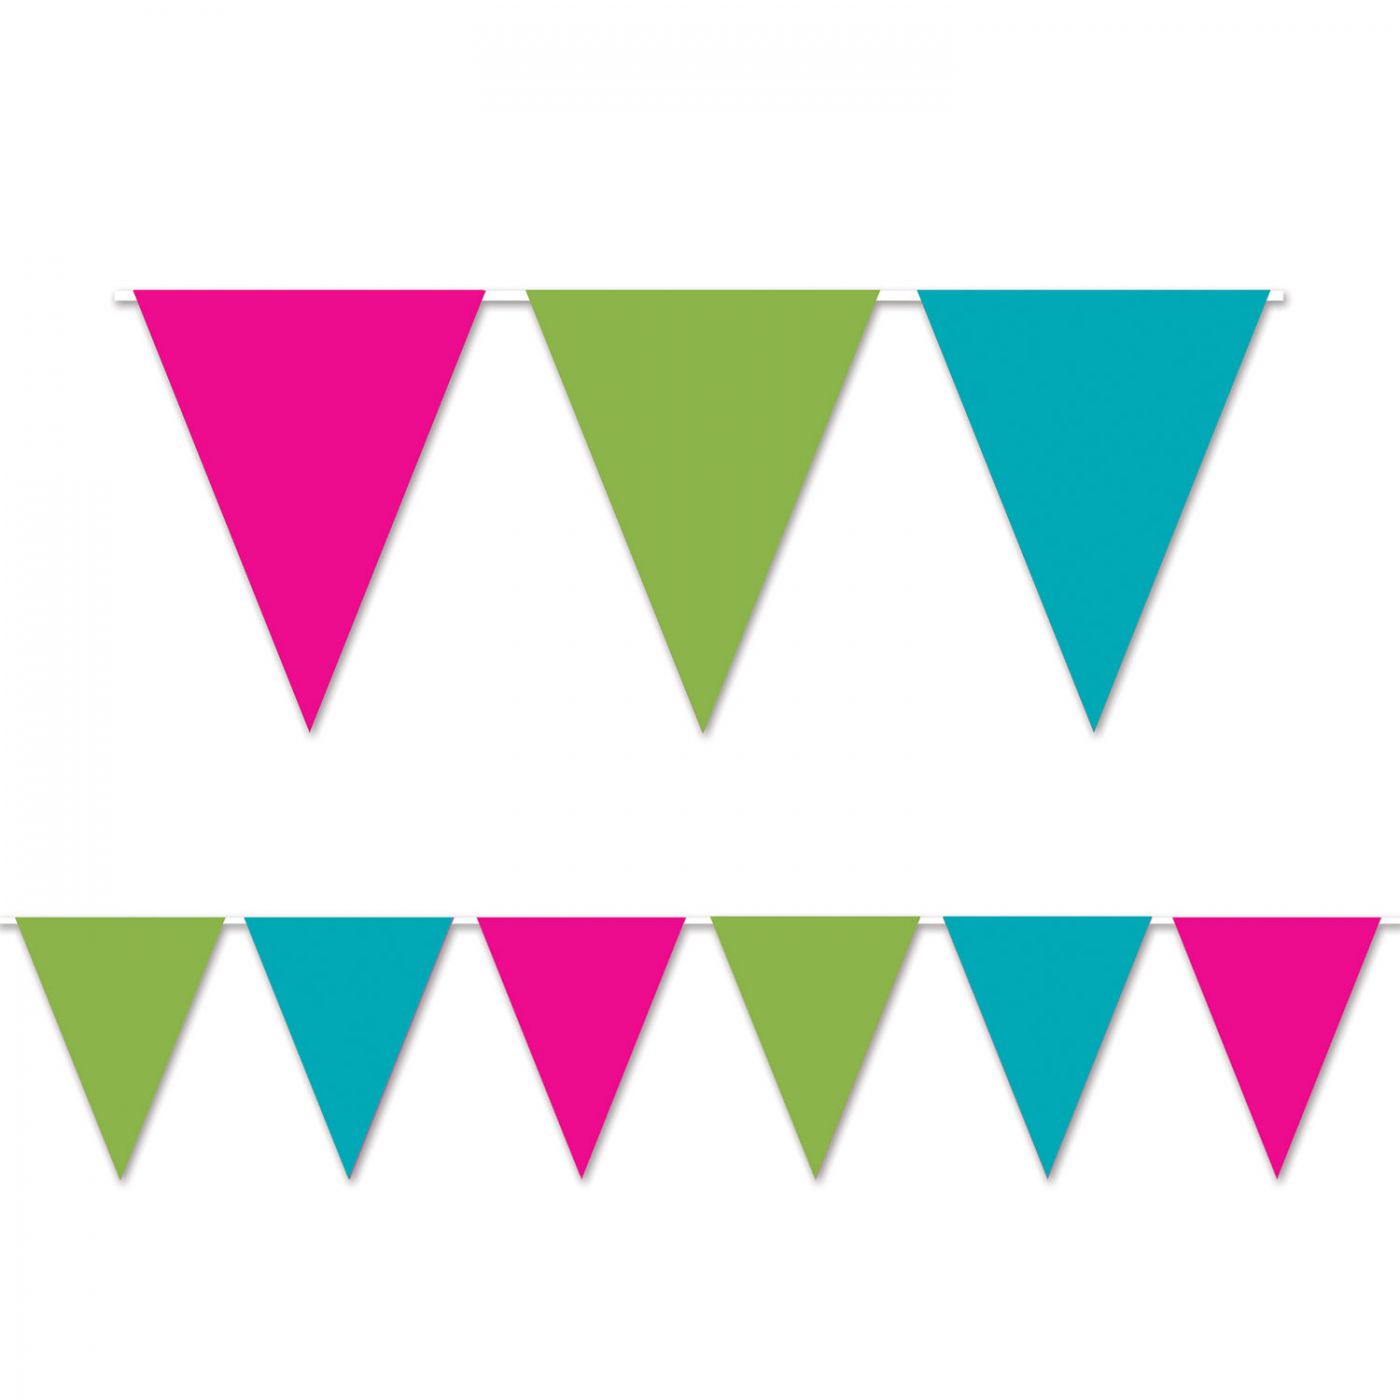 Image of Cerise,Lime Green &Turquoise Pennant Bnr (12)